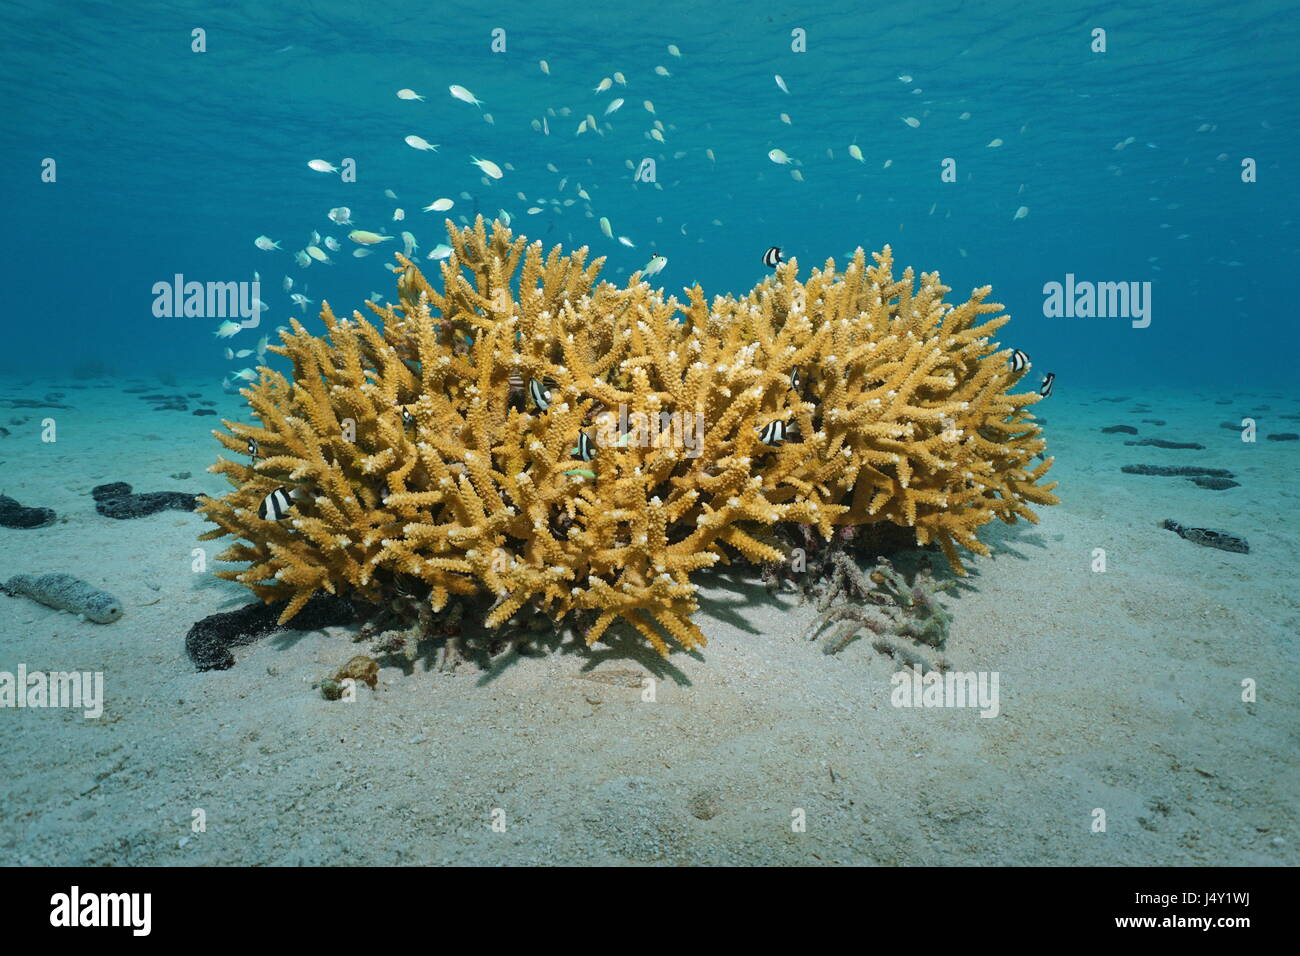 Staghorn coral underwater with fish blue-green chromis and whitetail dascyllus damselfish on a sandy seabed in the lagoon of Bora Bora, Pacific ocean Stock Photo